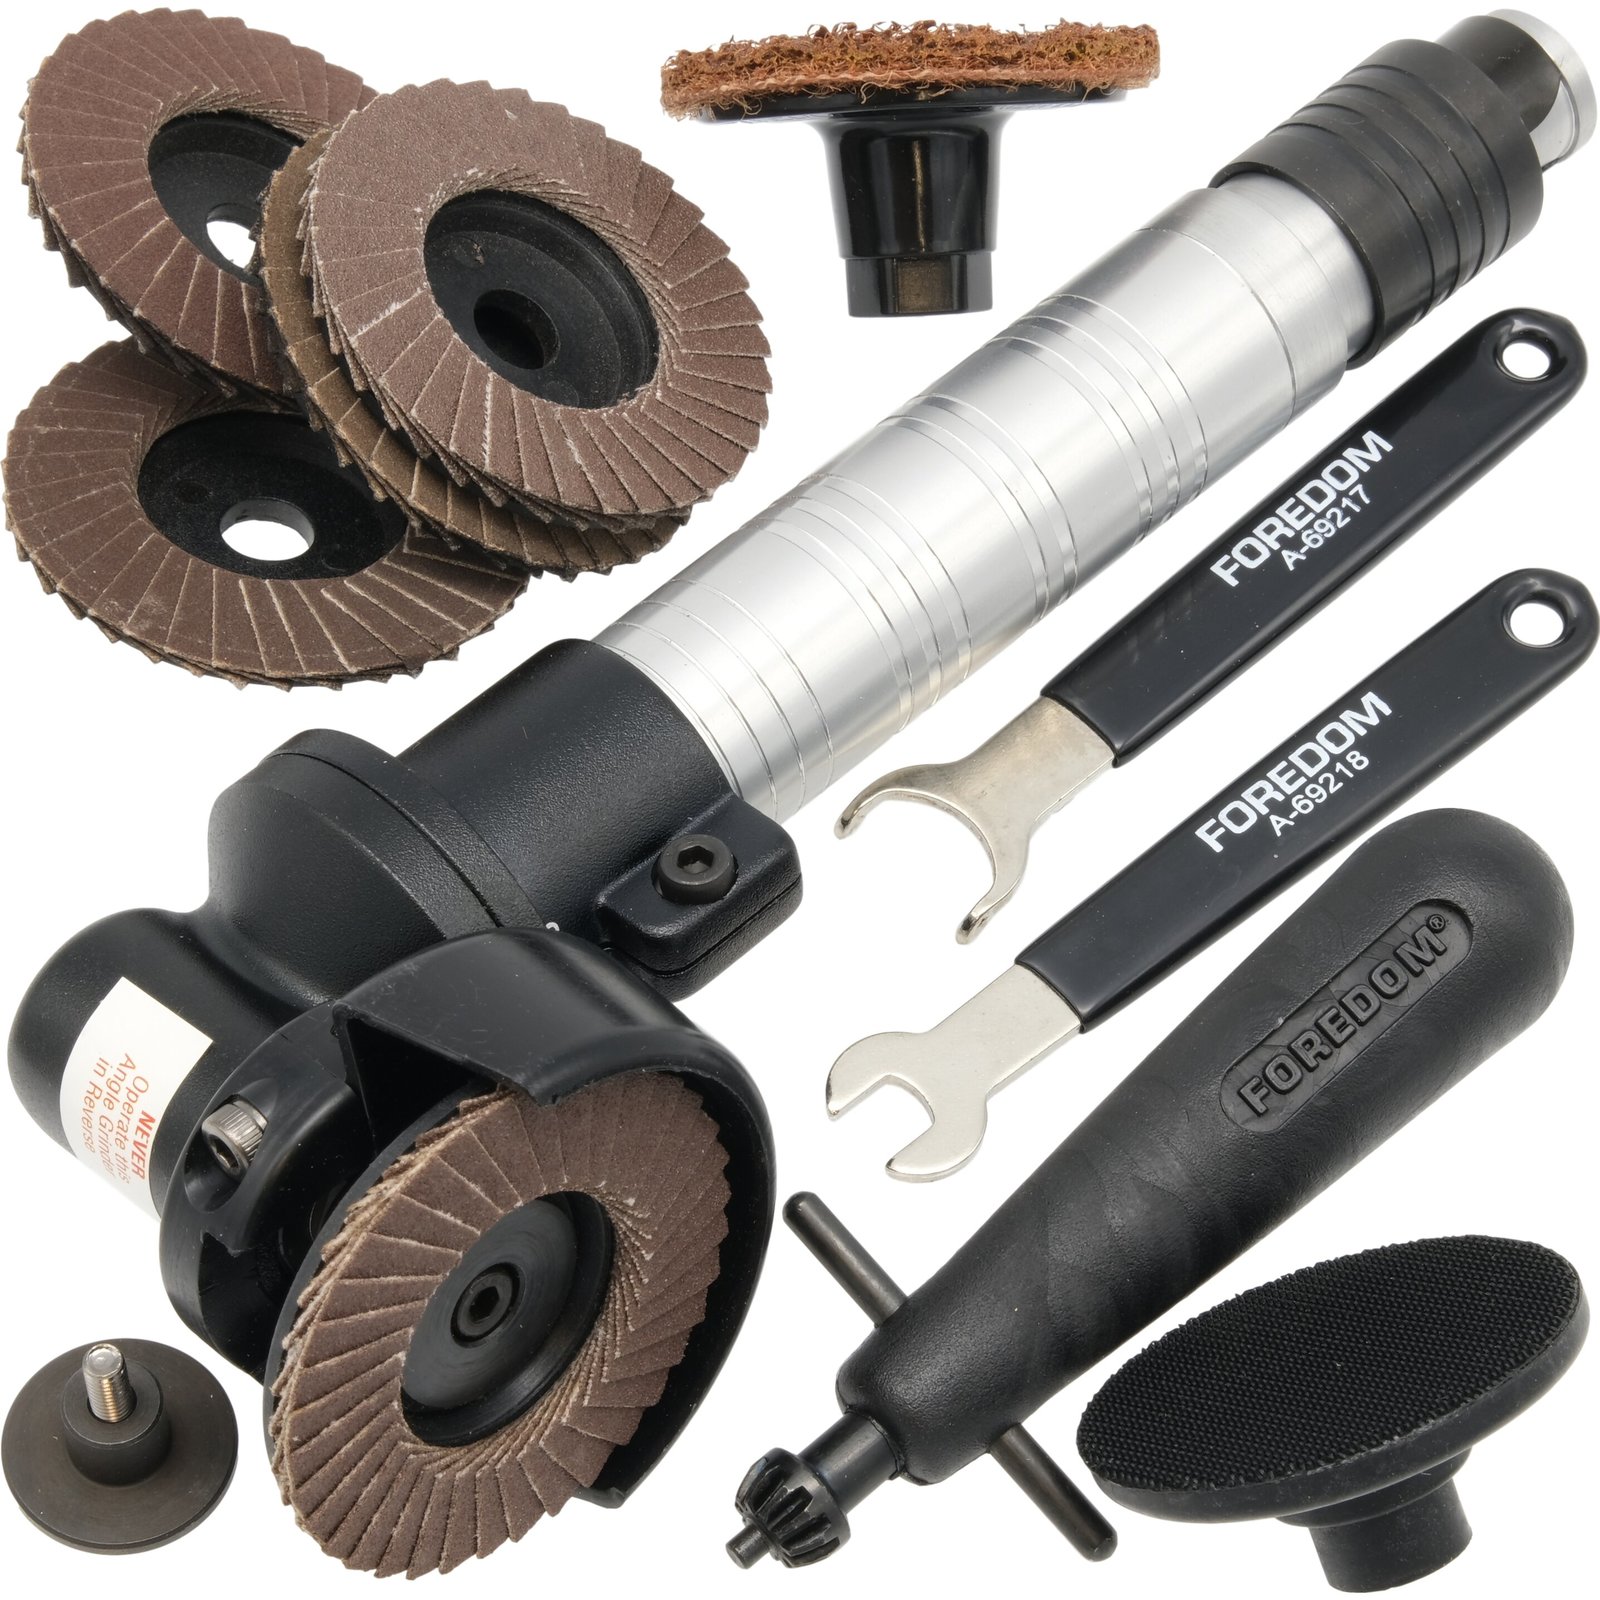 Primary image for FOREDOM ANGLE GRINDER KIT WITH 30H SQUARE DRIVE HANDPIECE & ACCESSORIES-AK69130H